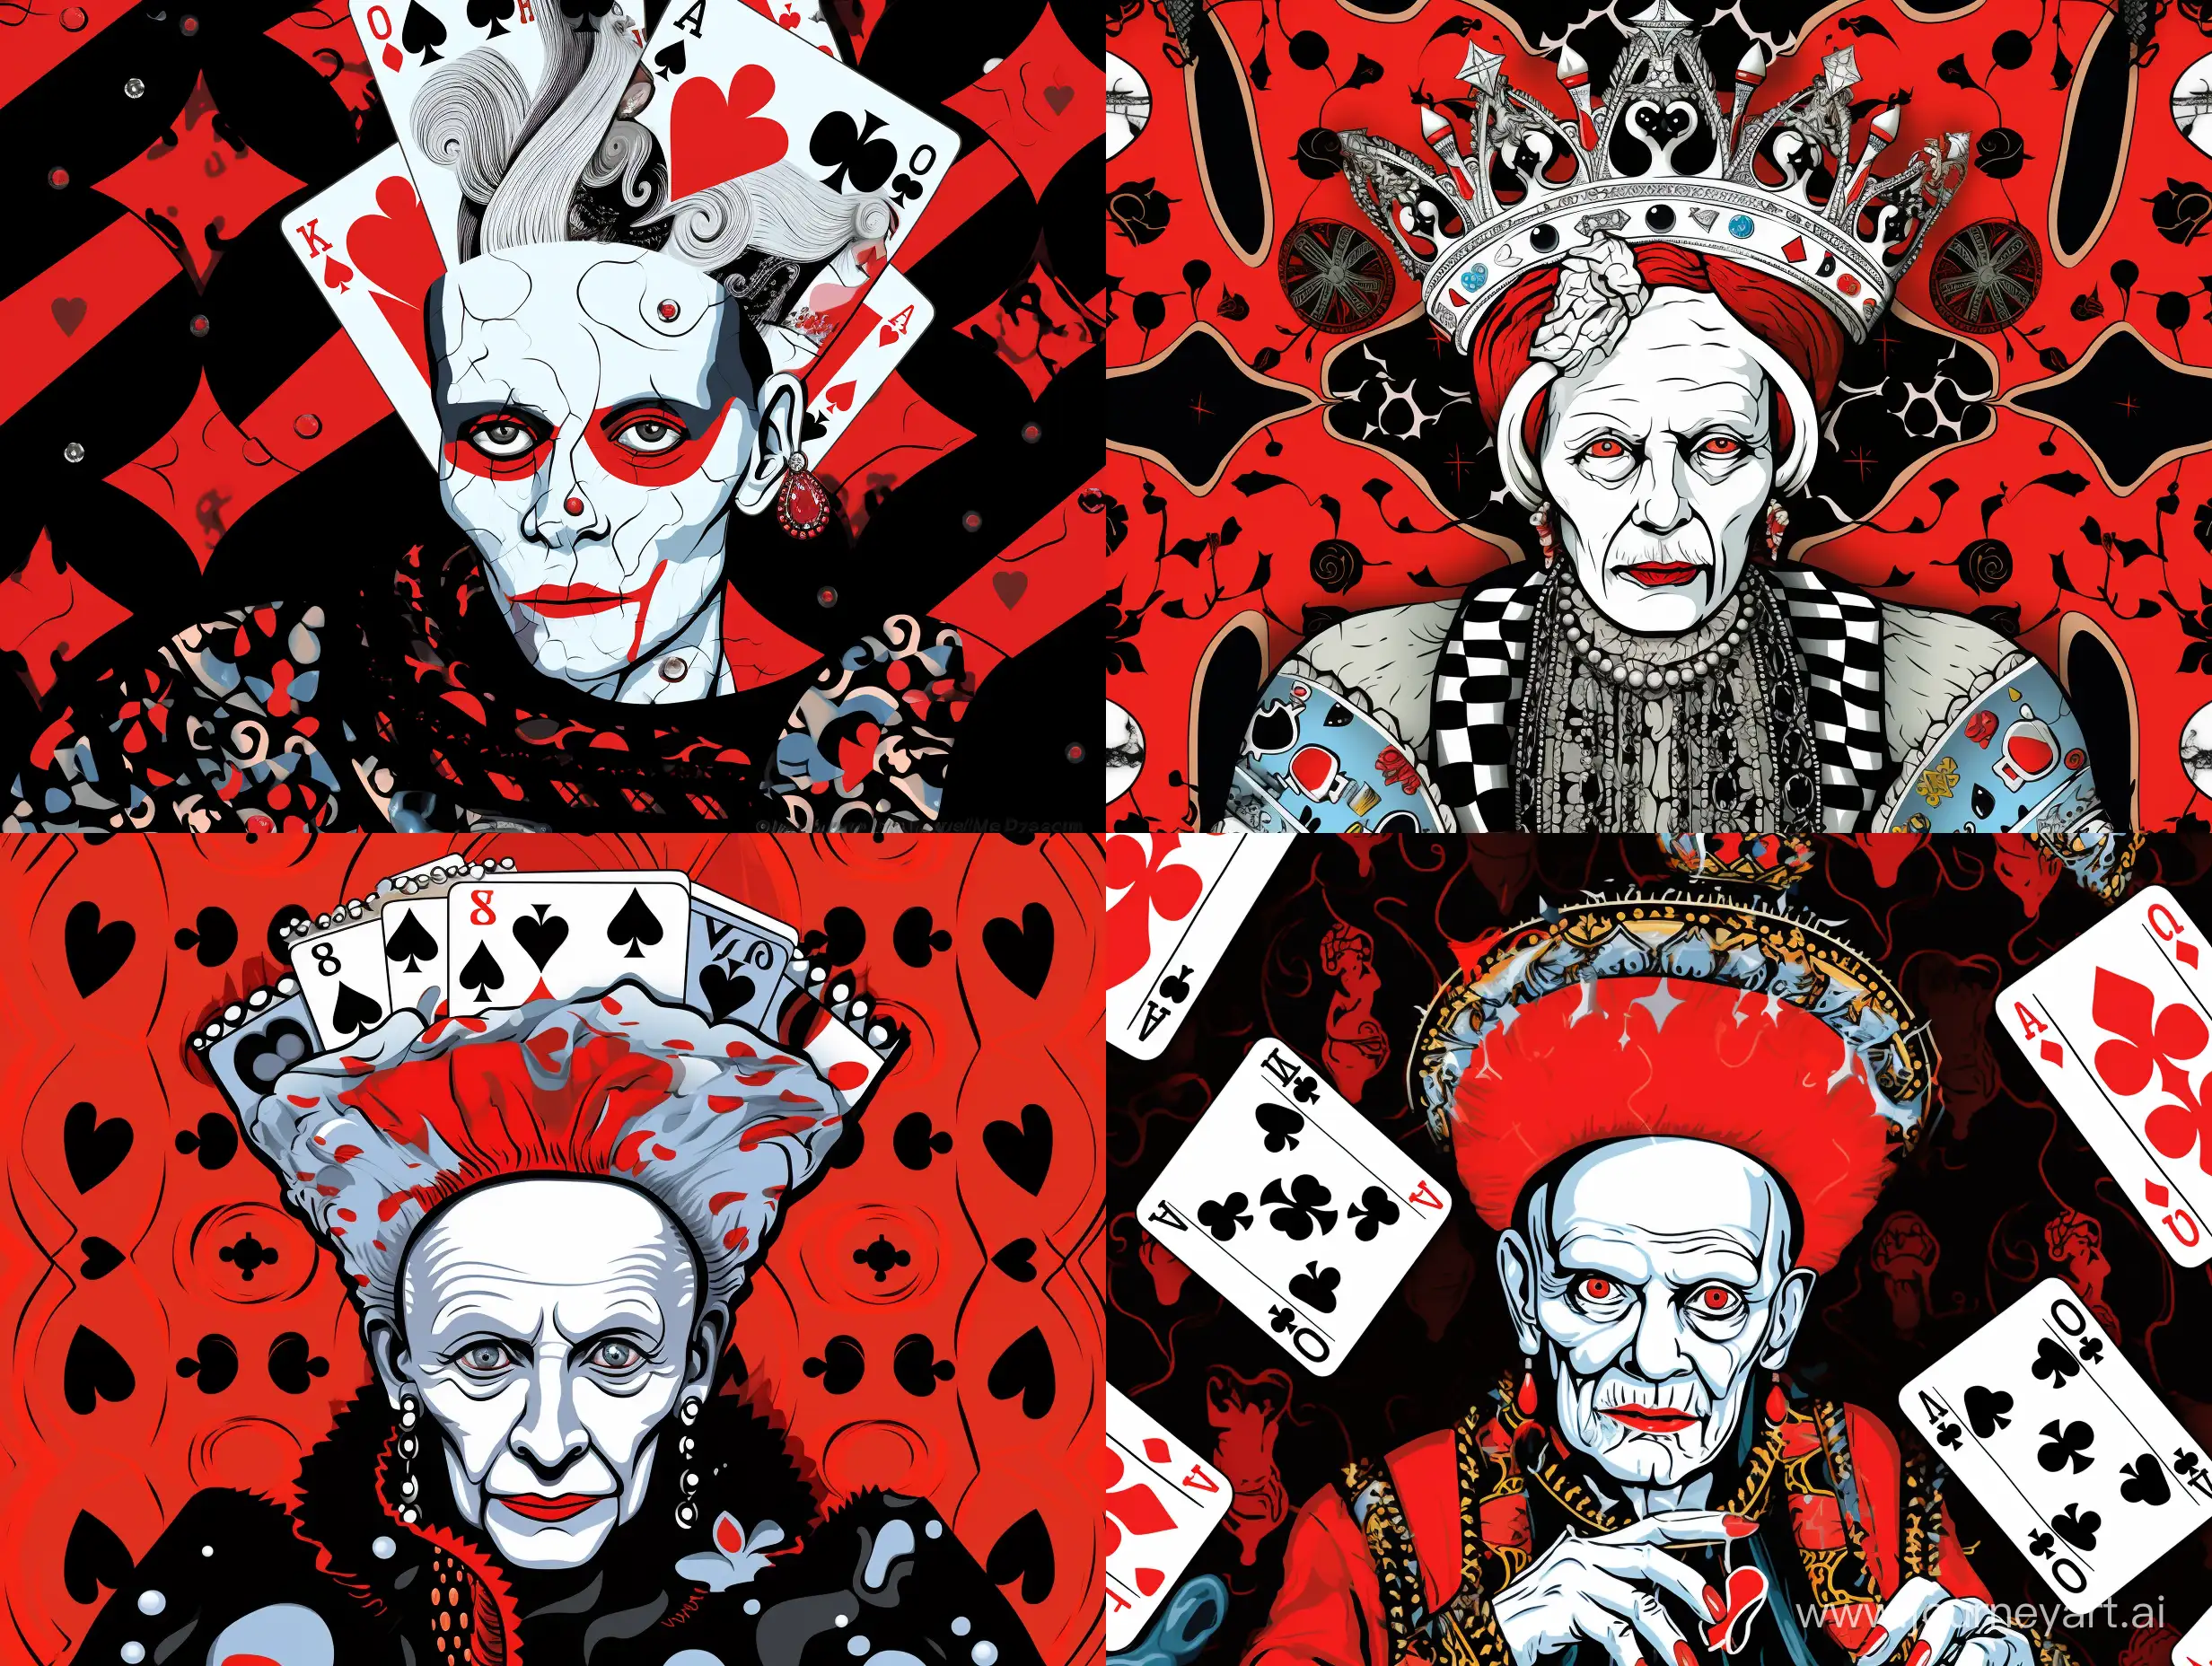 Portrait of an elderly Vivienne Westwood, with accessories from Westwood, with a small crown on her head, many details, complex, gloomy, against a background of a pattern of clubs, colors black, white, red, gray, caricature, pop art style, fashion illustration style